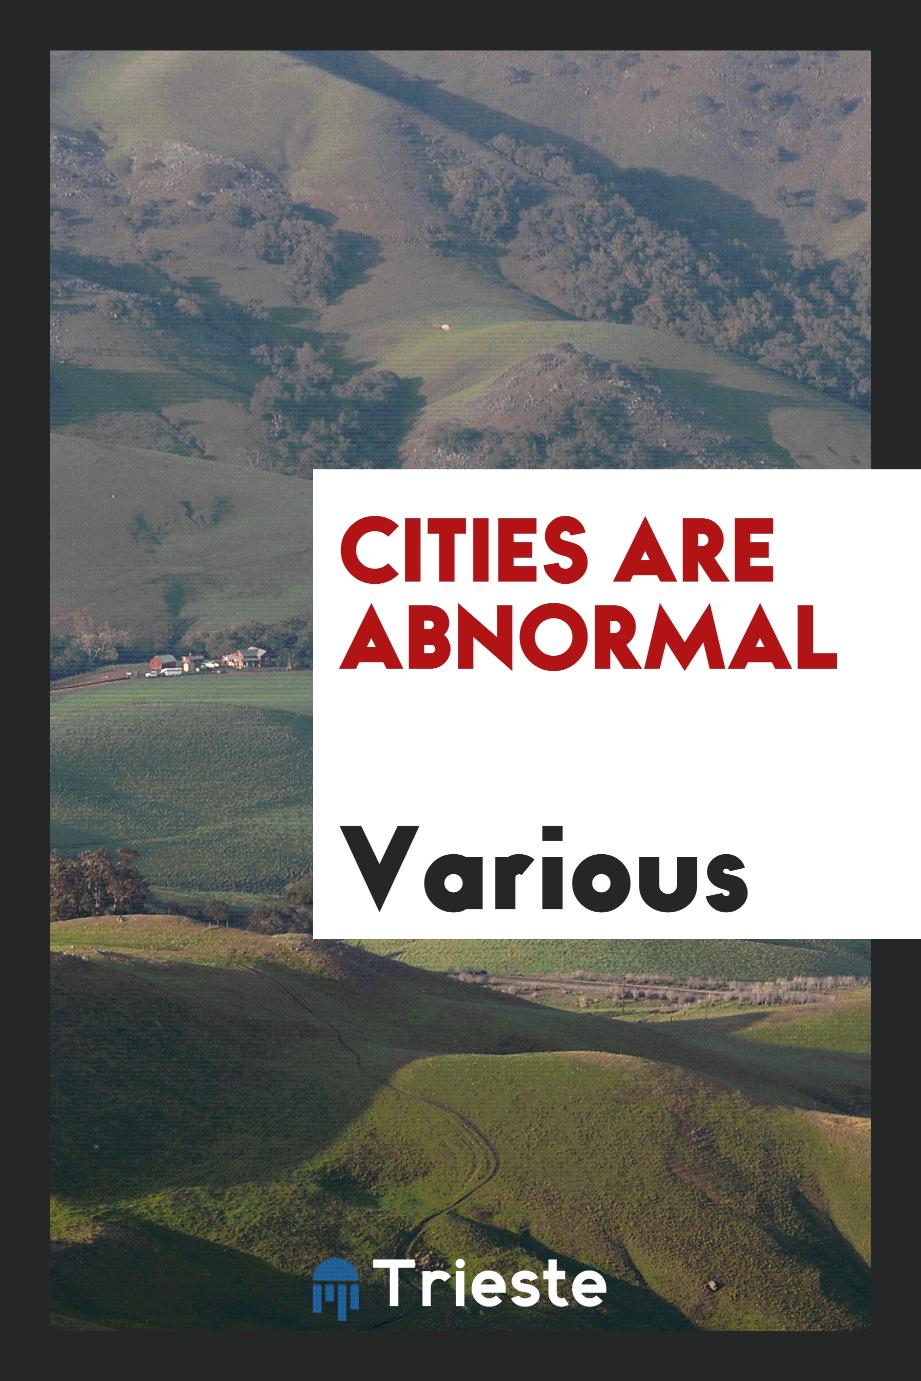 Cities are abnormal